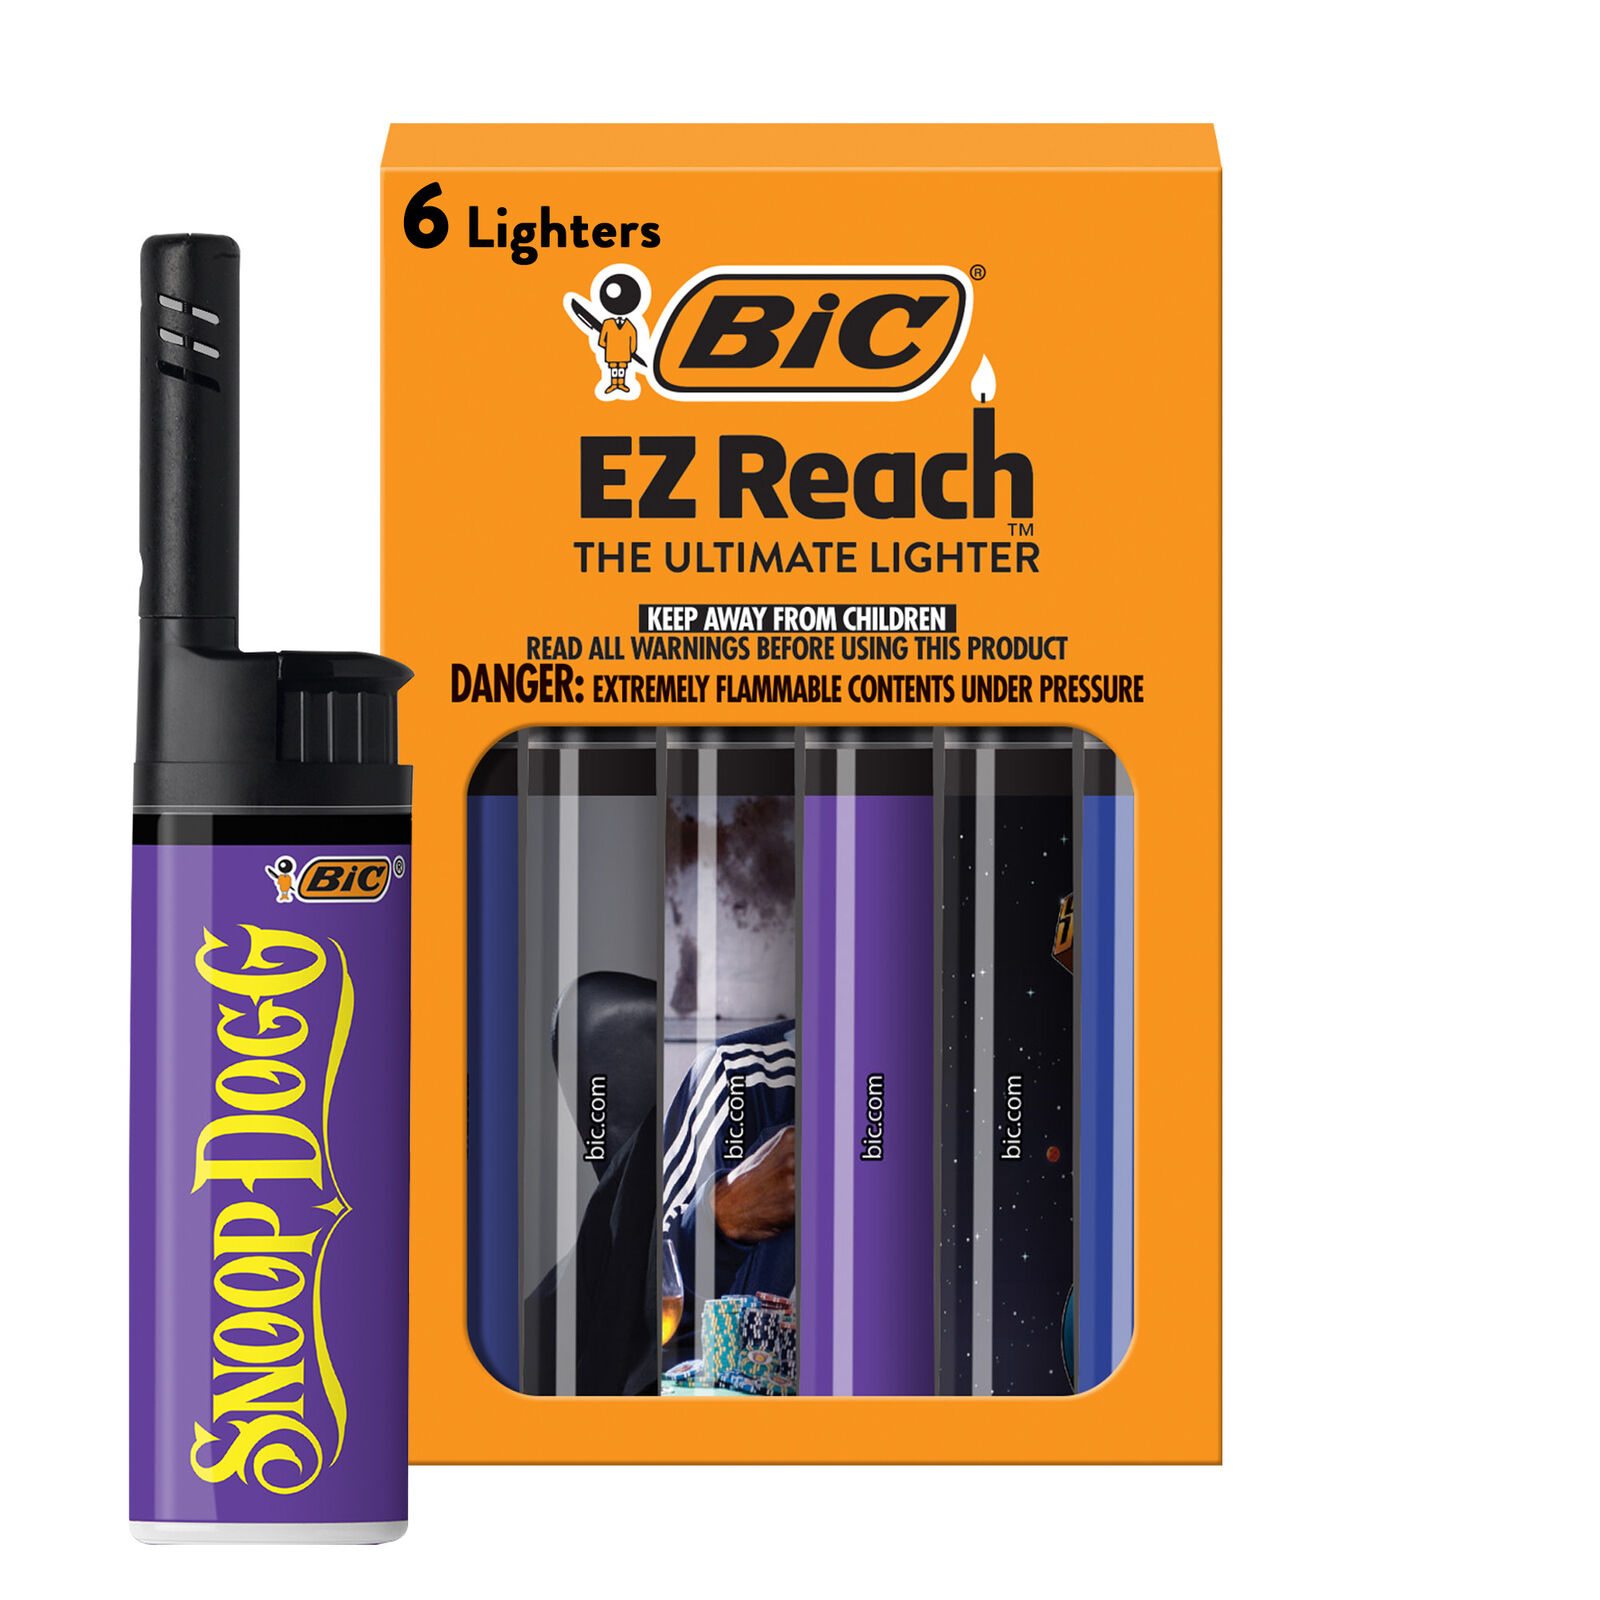 BIC EZ Reach Snoop Dogg Lighter, 6 Count Pack (Assortment of Designs May Vary)